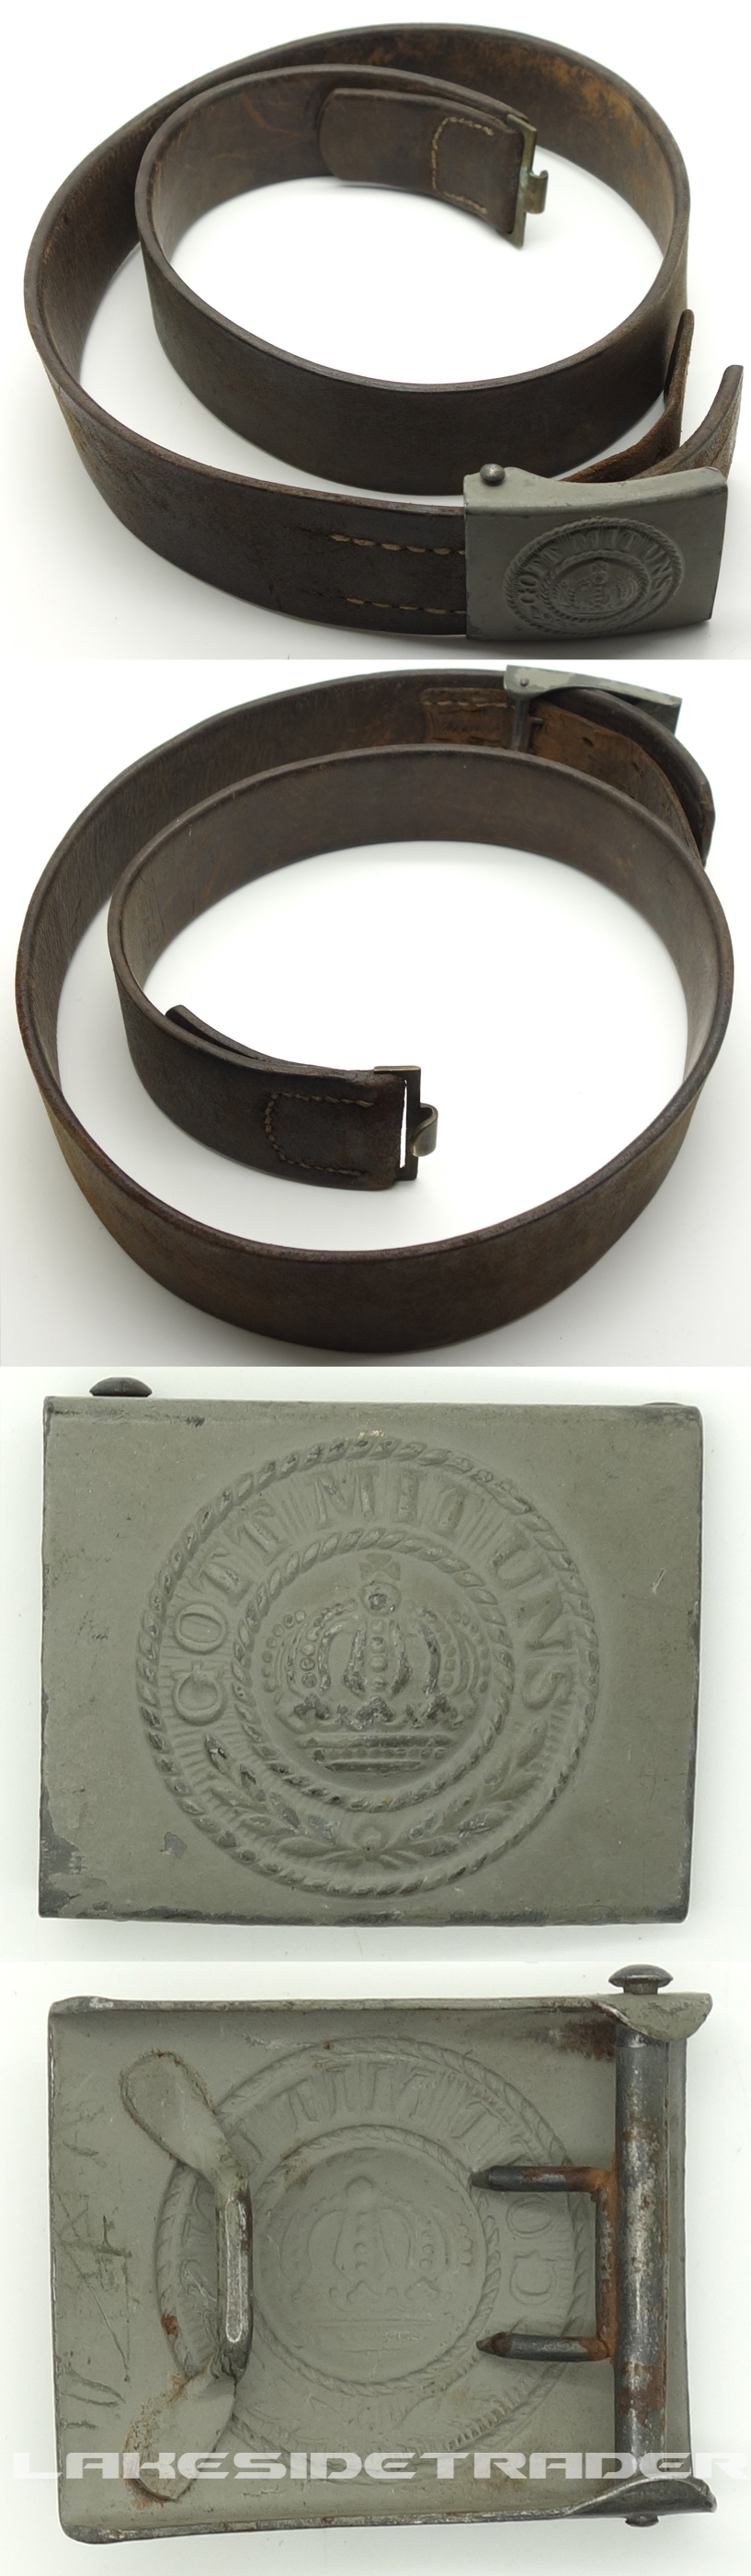 Imperial Prussian Army Belt & Buckle